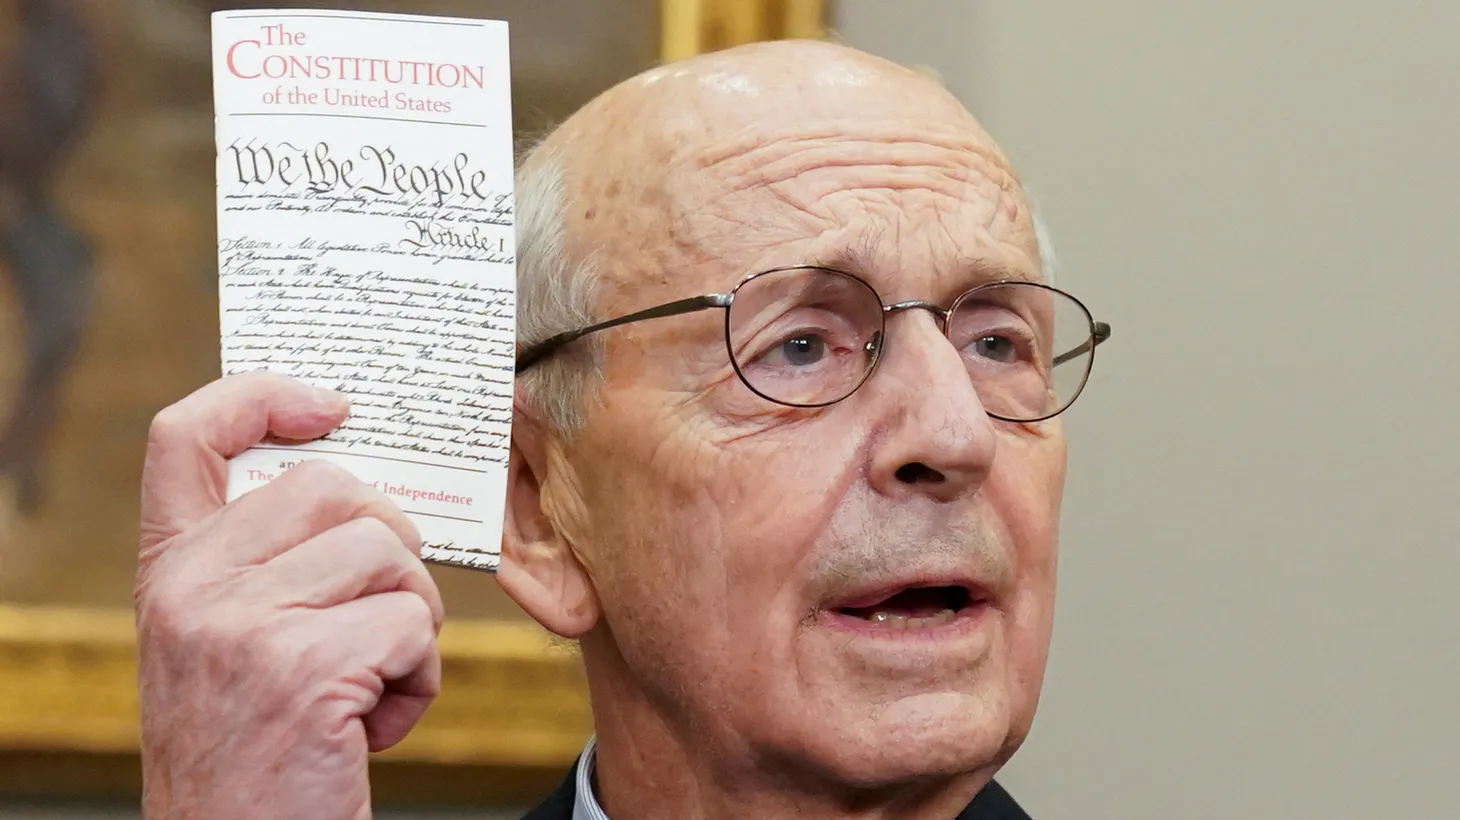 U.S. Supreme Court Justice Stephen Breyer holds up a copy of the U.S. Constitution while announcing he will retire at the end of the court's current term, at the White House. January 27, 2022.